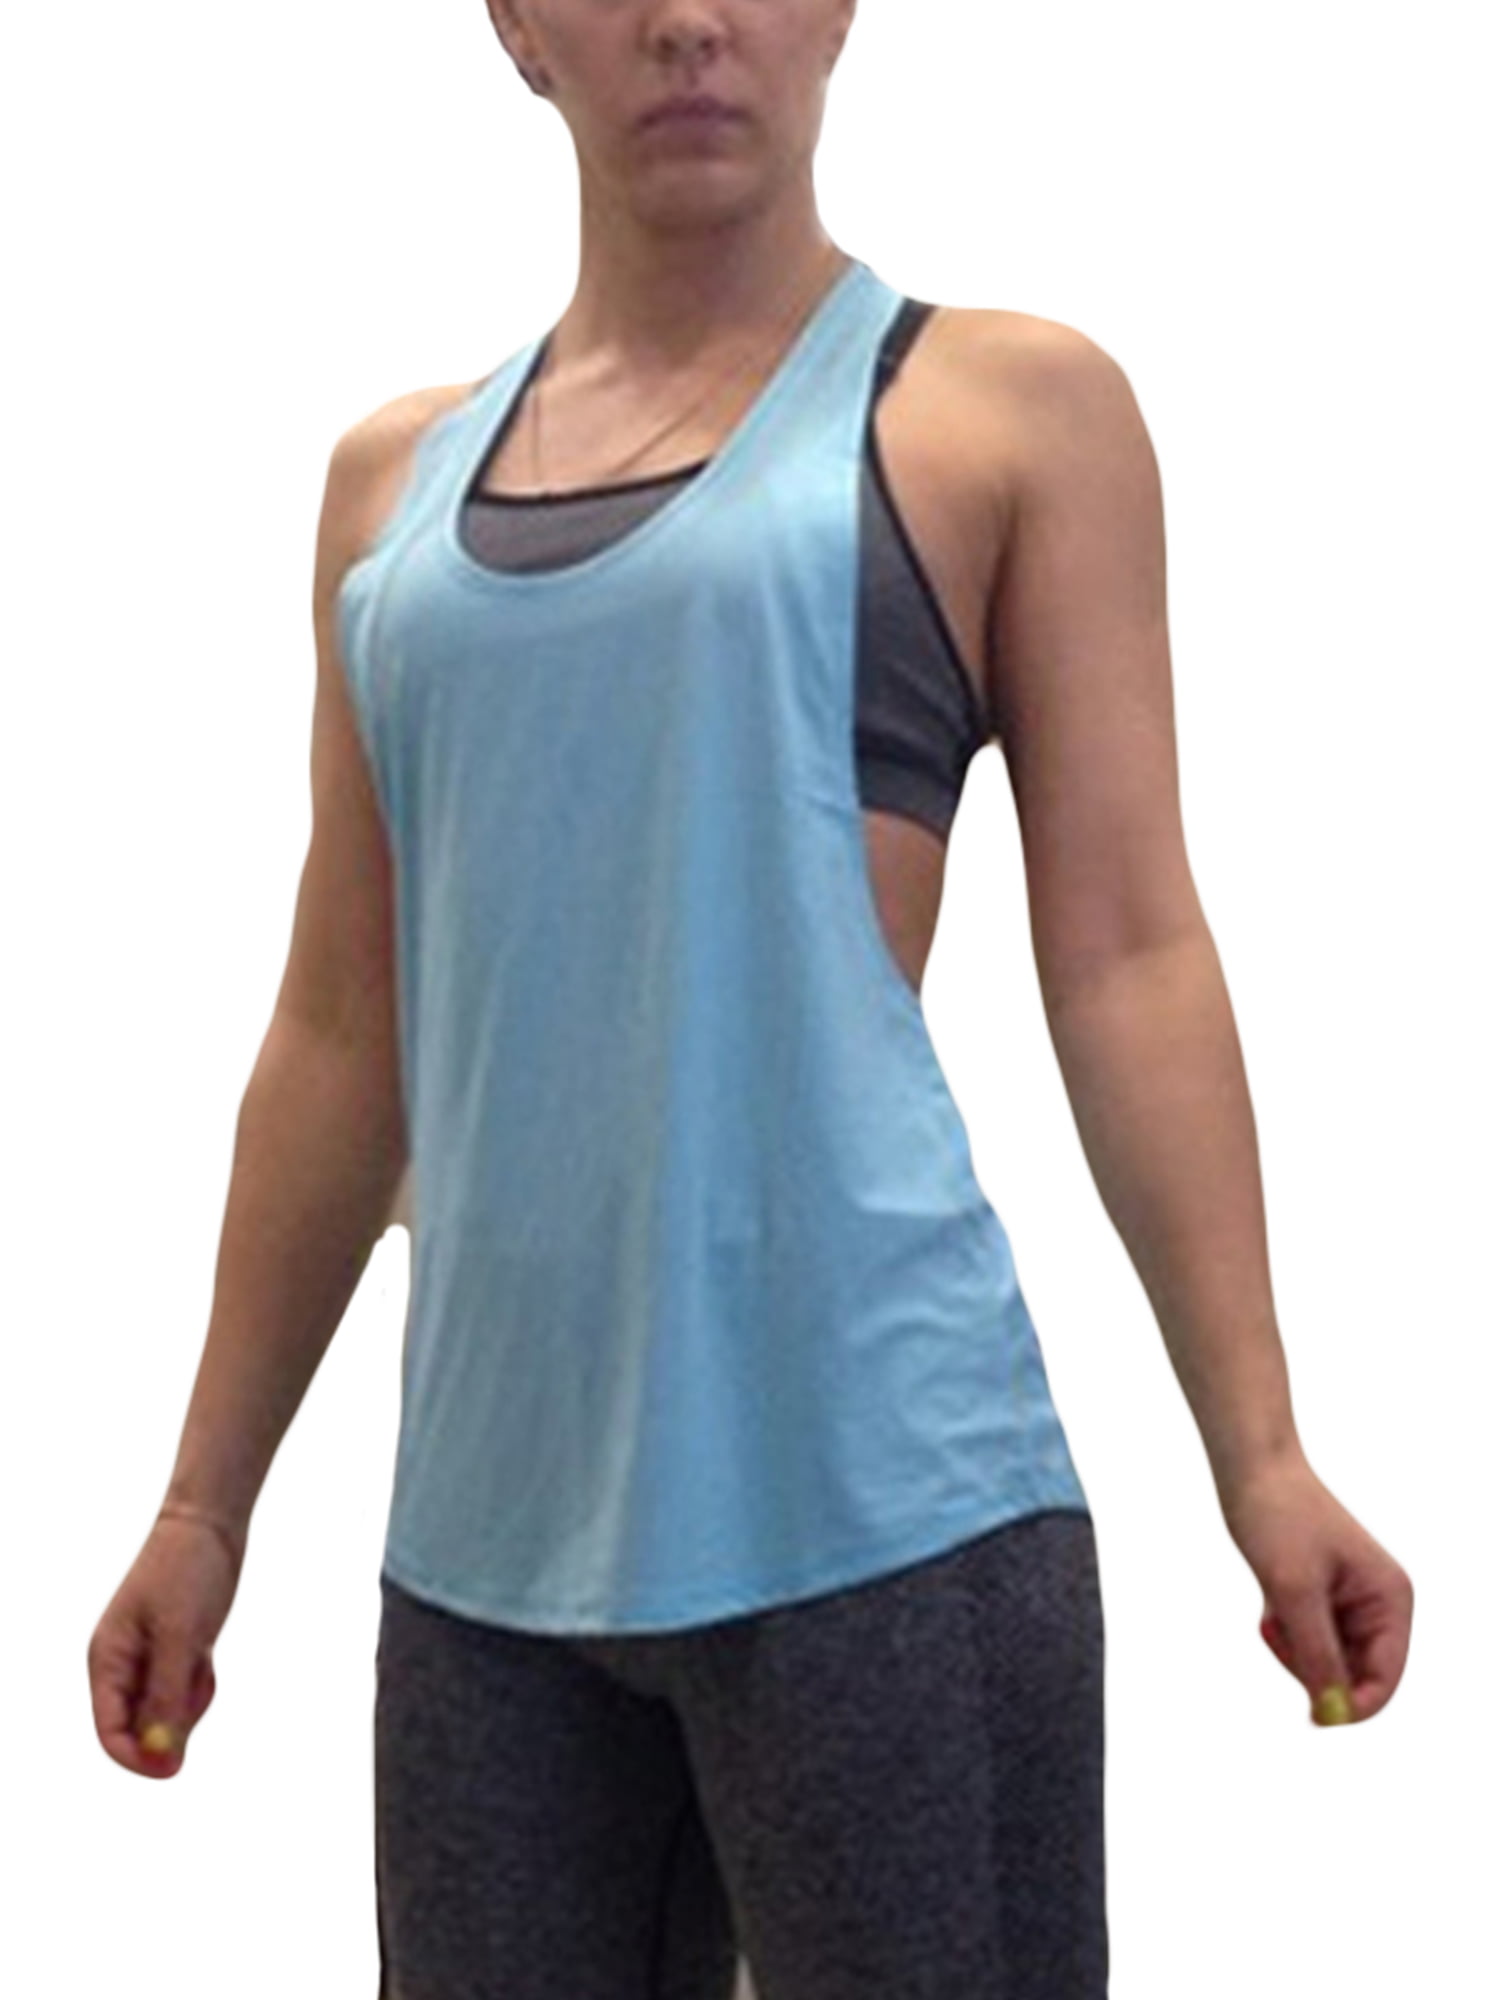 NAUVI Womens Active Wear Vest T-Shirt Tank Top for Fitness Running Gym Active Sports